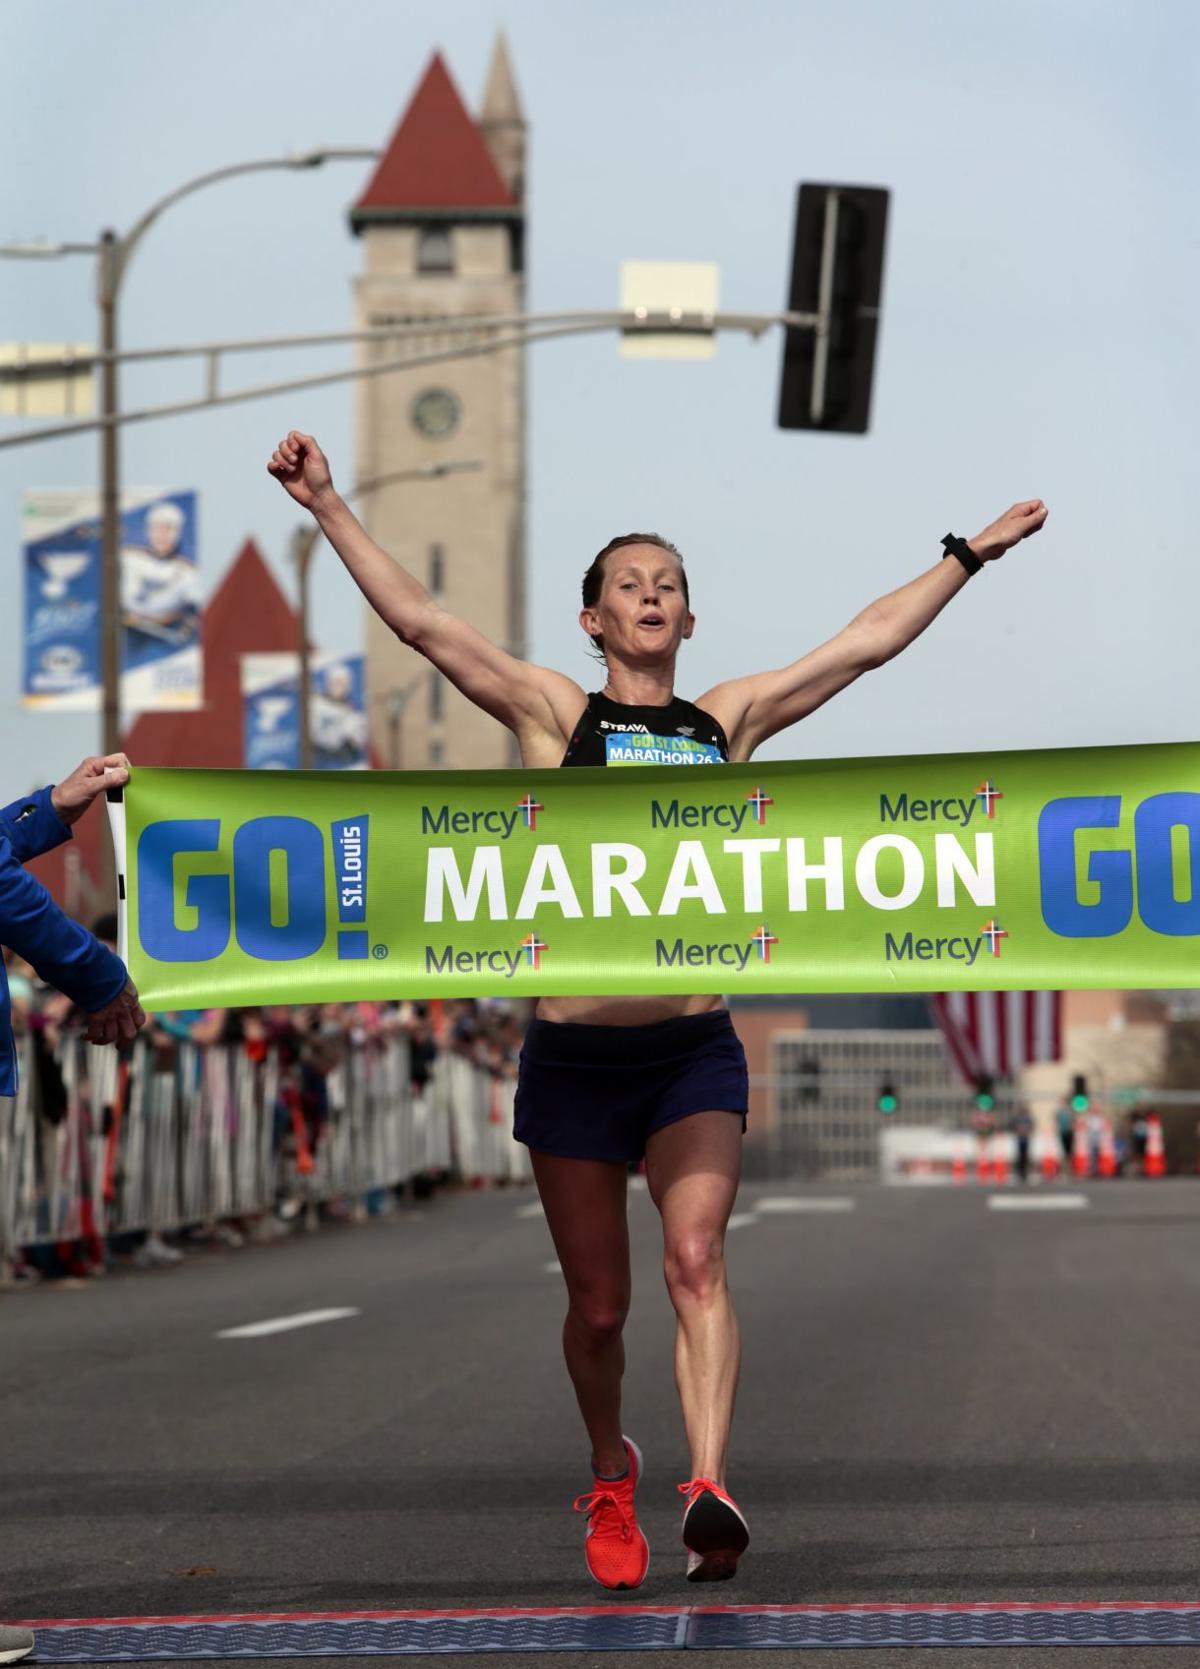 On a warm day for runners, two newcomers win at Go! St. Louis Marathon | Sports | www.strongerinc.org